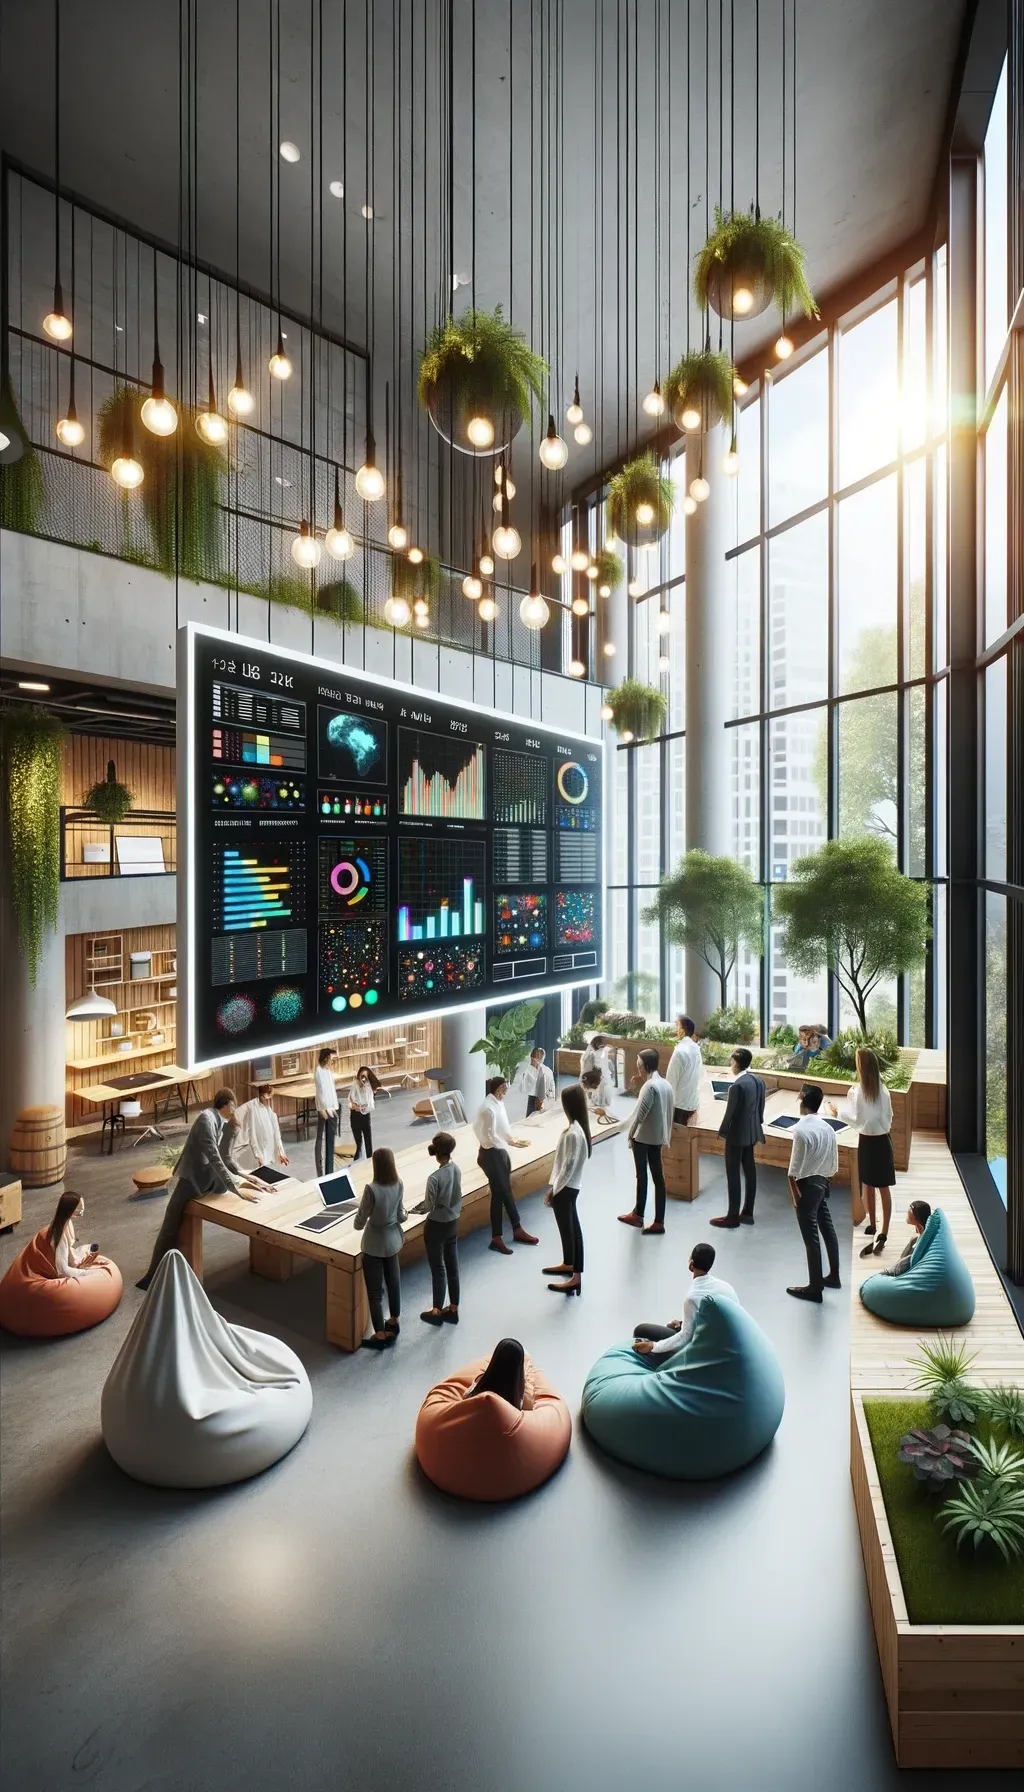 Photo of a spacious, vertically-oriented modern workspace filled with natural light from large windows. Bean bags are scattered around, next to green plants and innovative high-tech equipment. A multi-ethnic group of young data scientists are standing and collaborating on a large interactive touch table in the center, deeply engrossed in colorful data visualizations. Above them, hanging lights illuminate the area, creating a warm ambiance, while on the side, a whiteboard displays sketches and notes. The scene captures a harmonious blend of relaxation and productivity, showcasing the fun and dynamic nature of the consulting group.